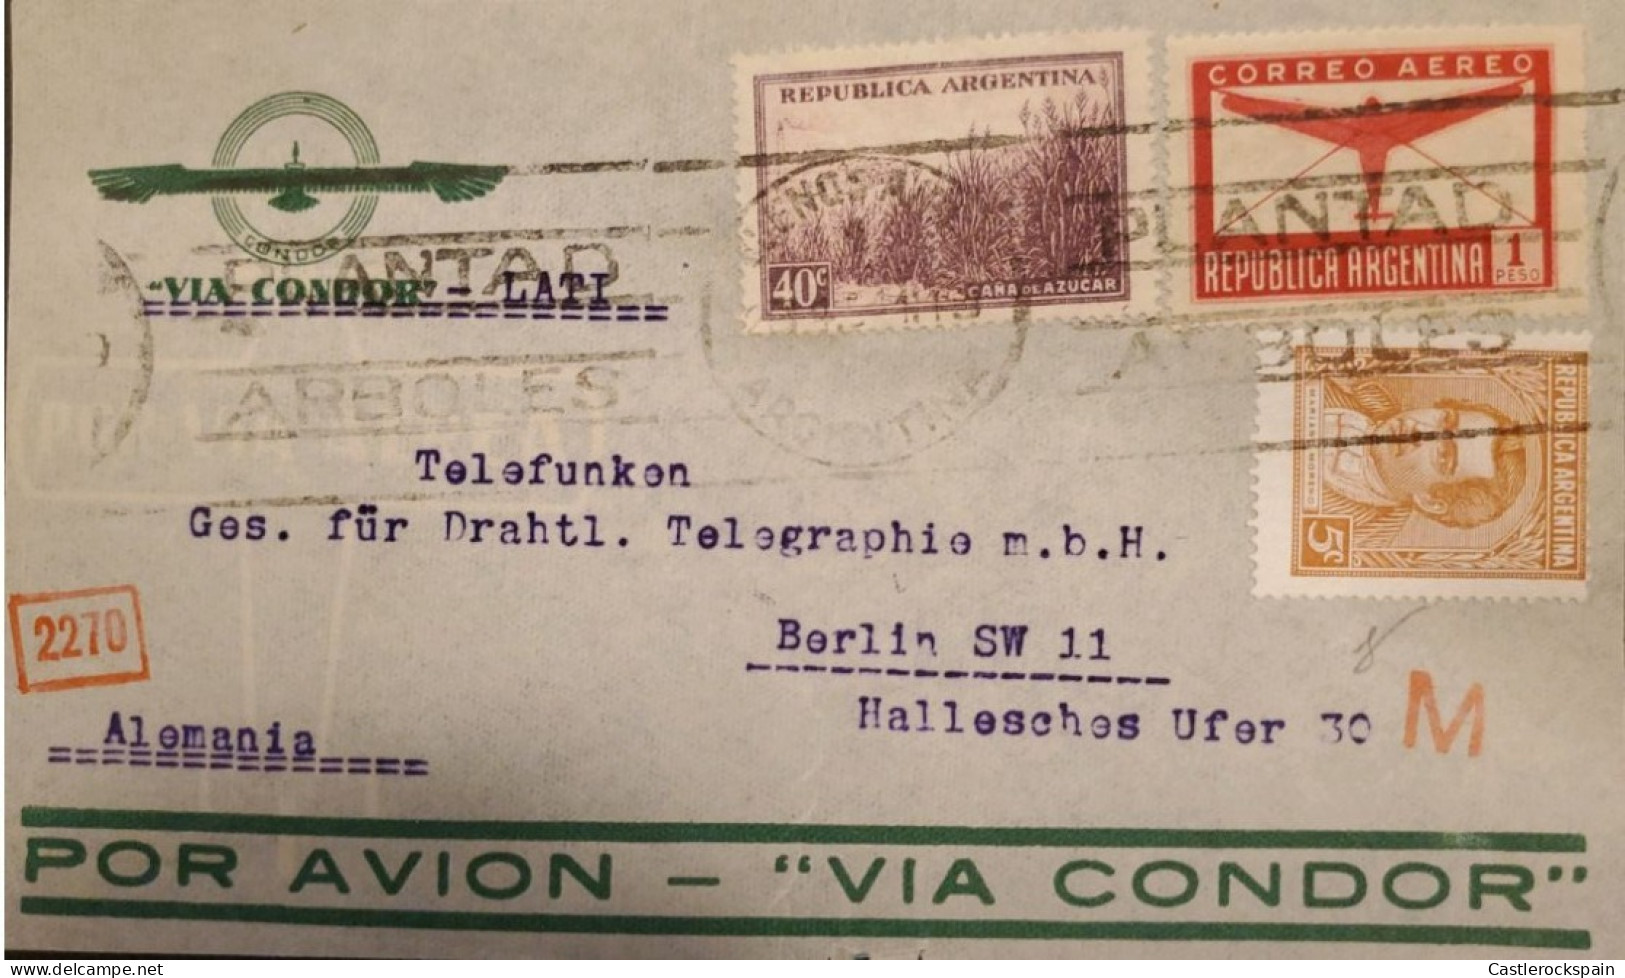 MI) 1936-42, ARGENTINA, AIR MAIL, VIA CONDOR, FROM BUENOS AIRES TO GERMANY, WITH CANCELLATION SLOGAN, MARIANO MORENO STA - Gebraucht